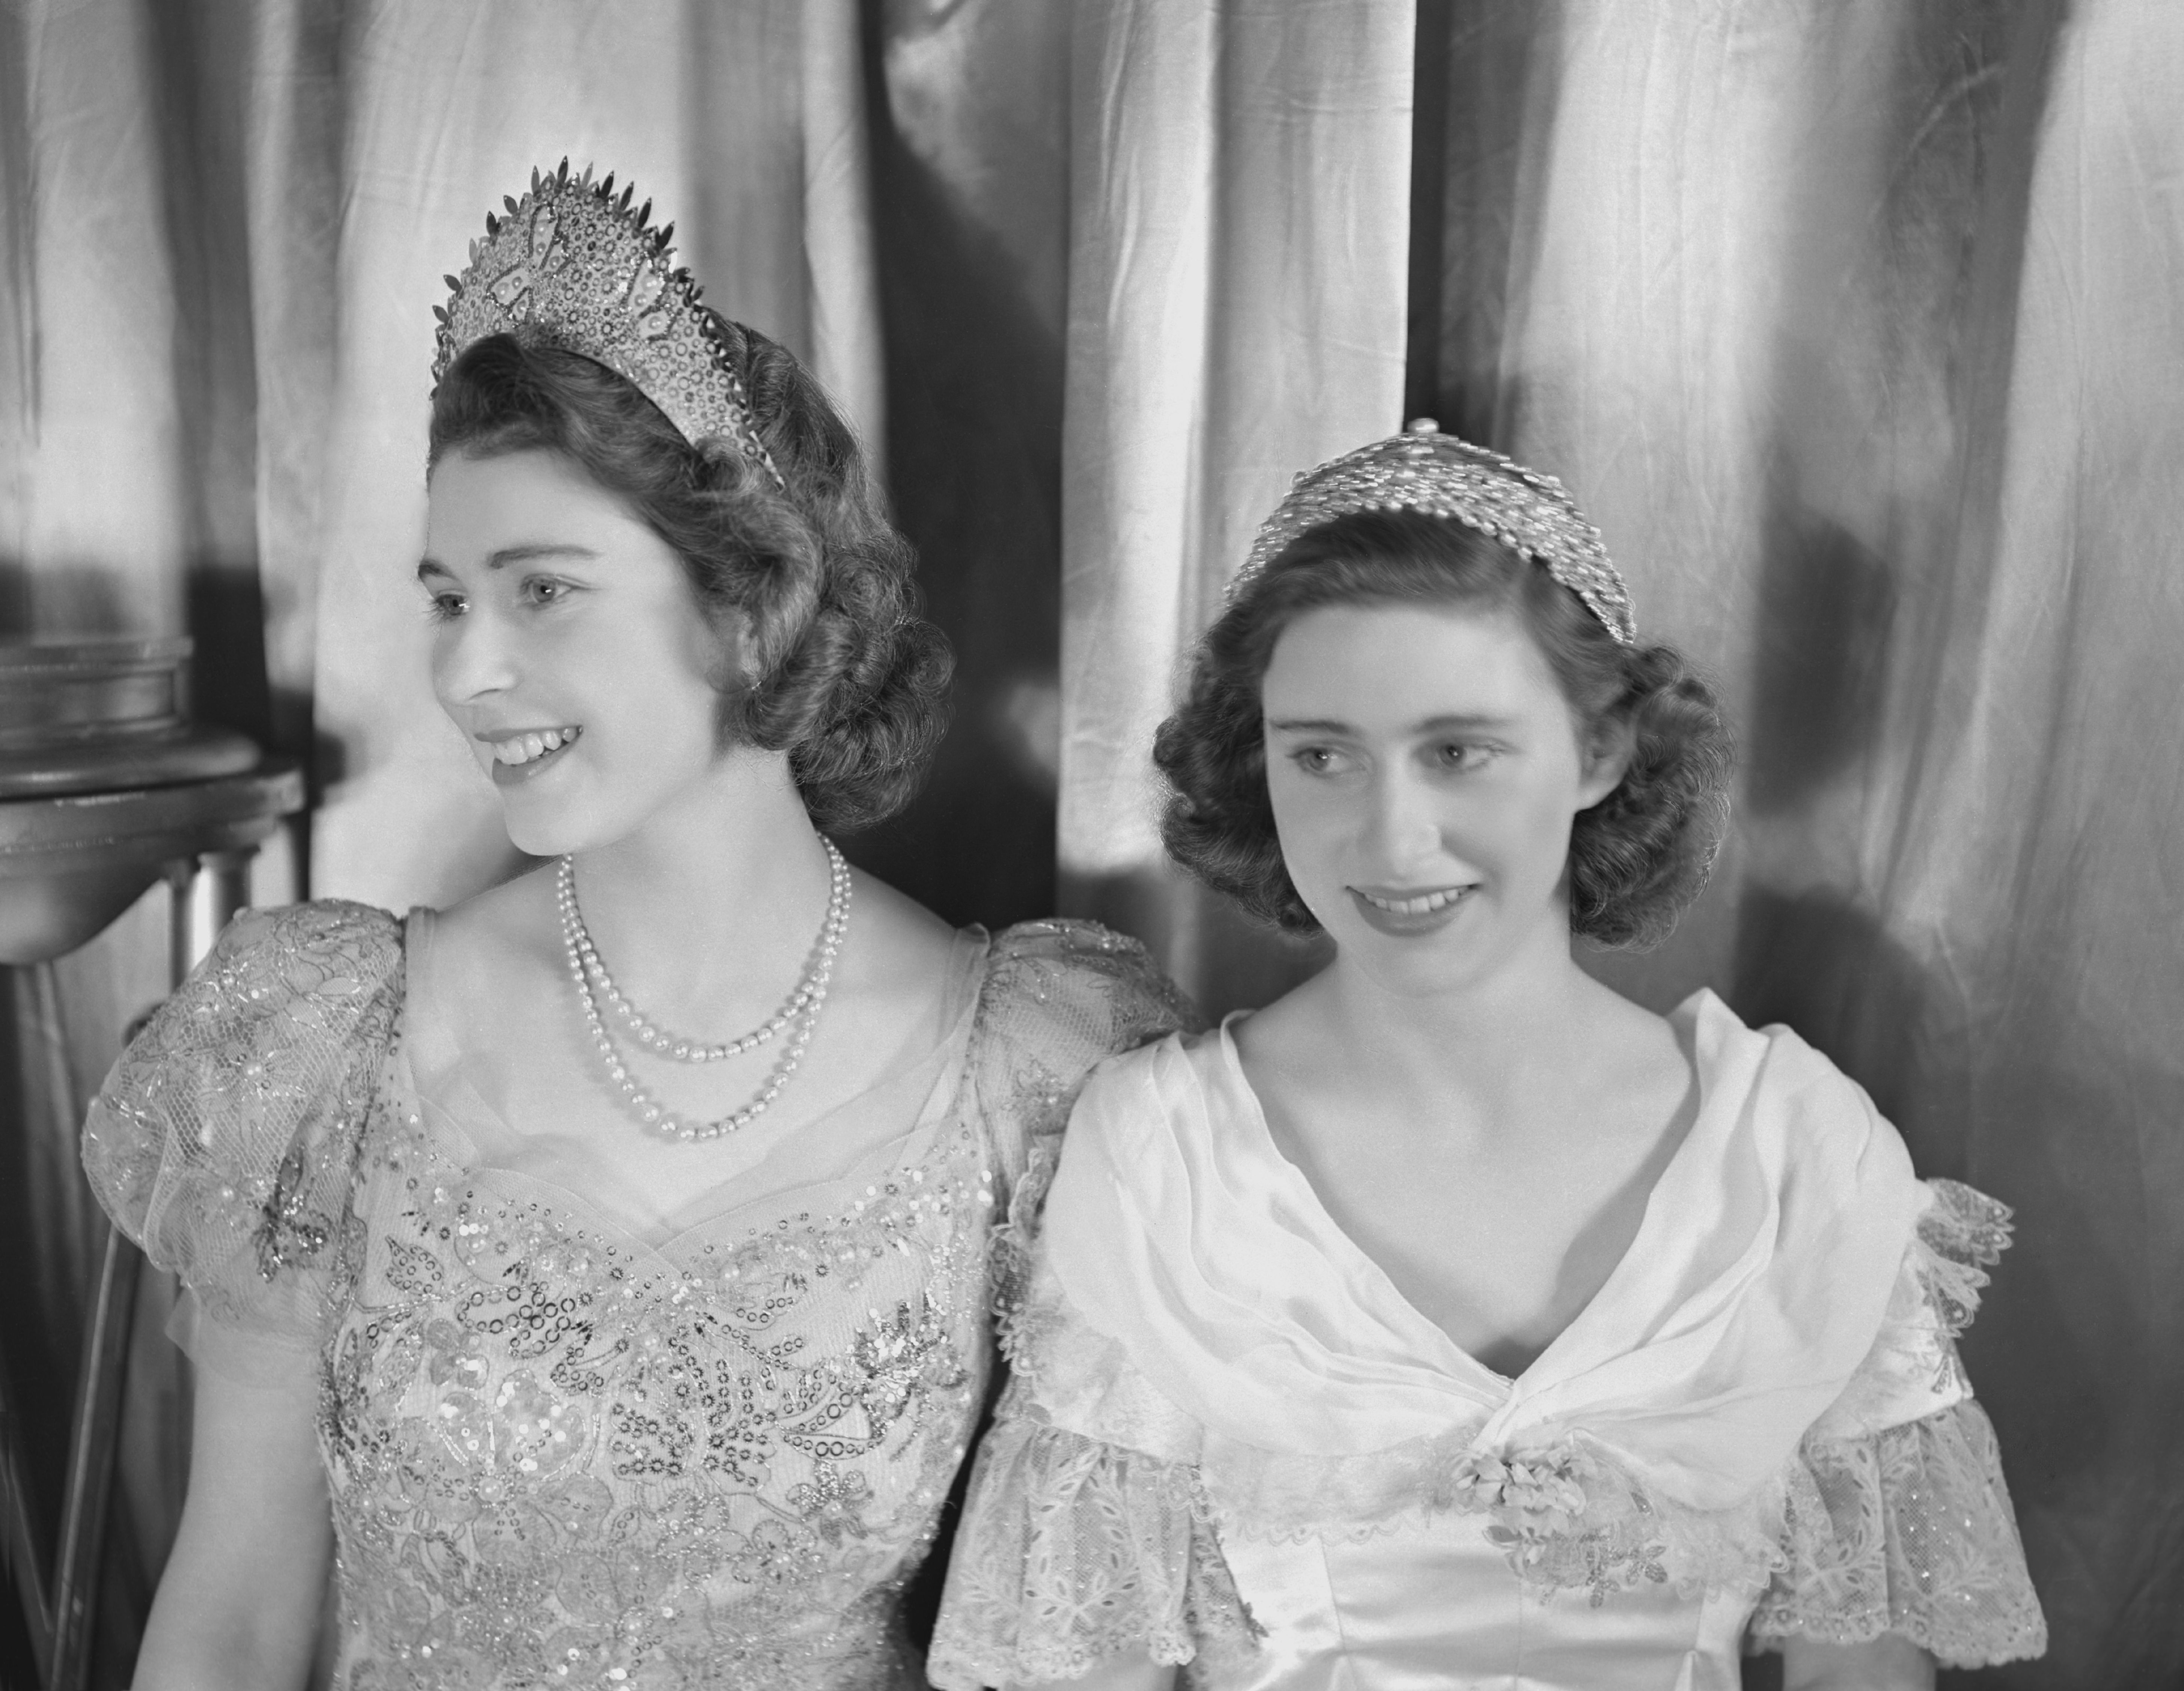 Beautiful Photos Of Queen Elizabeth And Princess Margaret When They Were Young Vintage Pictures Of Queen Elizabeth And Princess Margaret